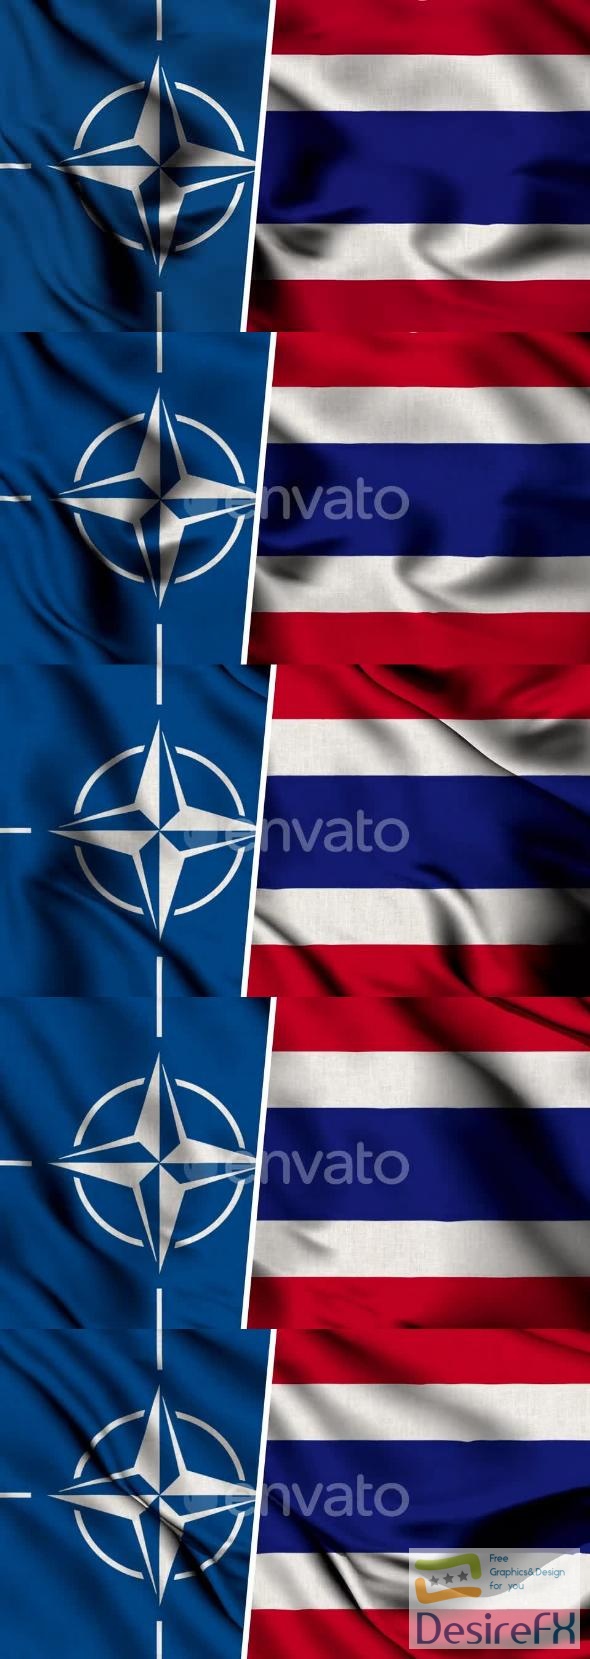 VideoHive Nato Flag And Flag Of Thailand 47577788